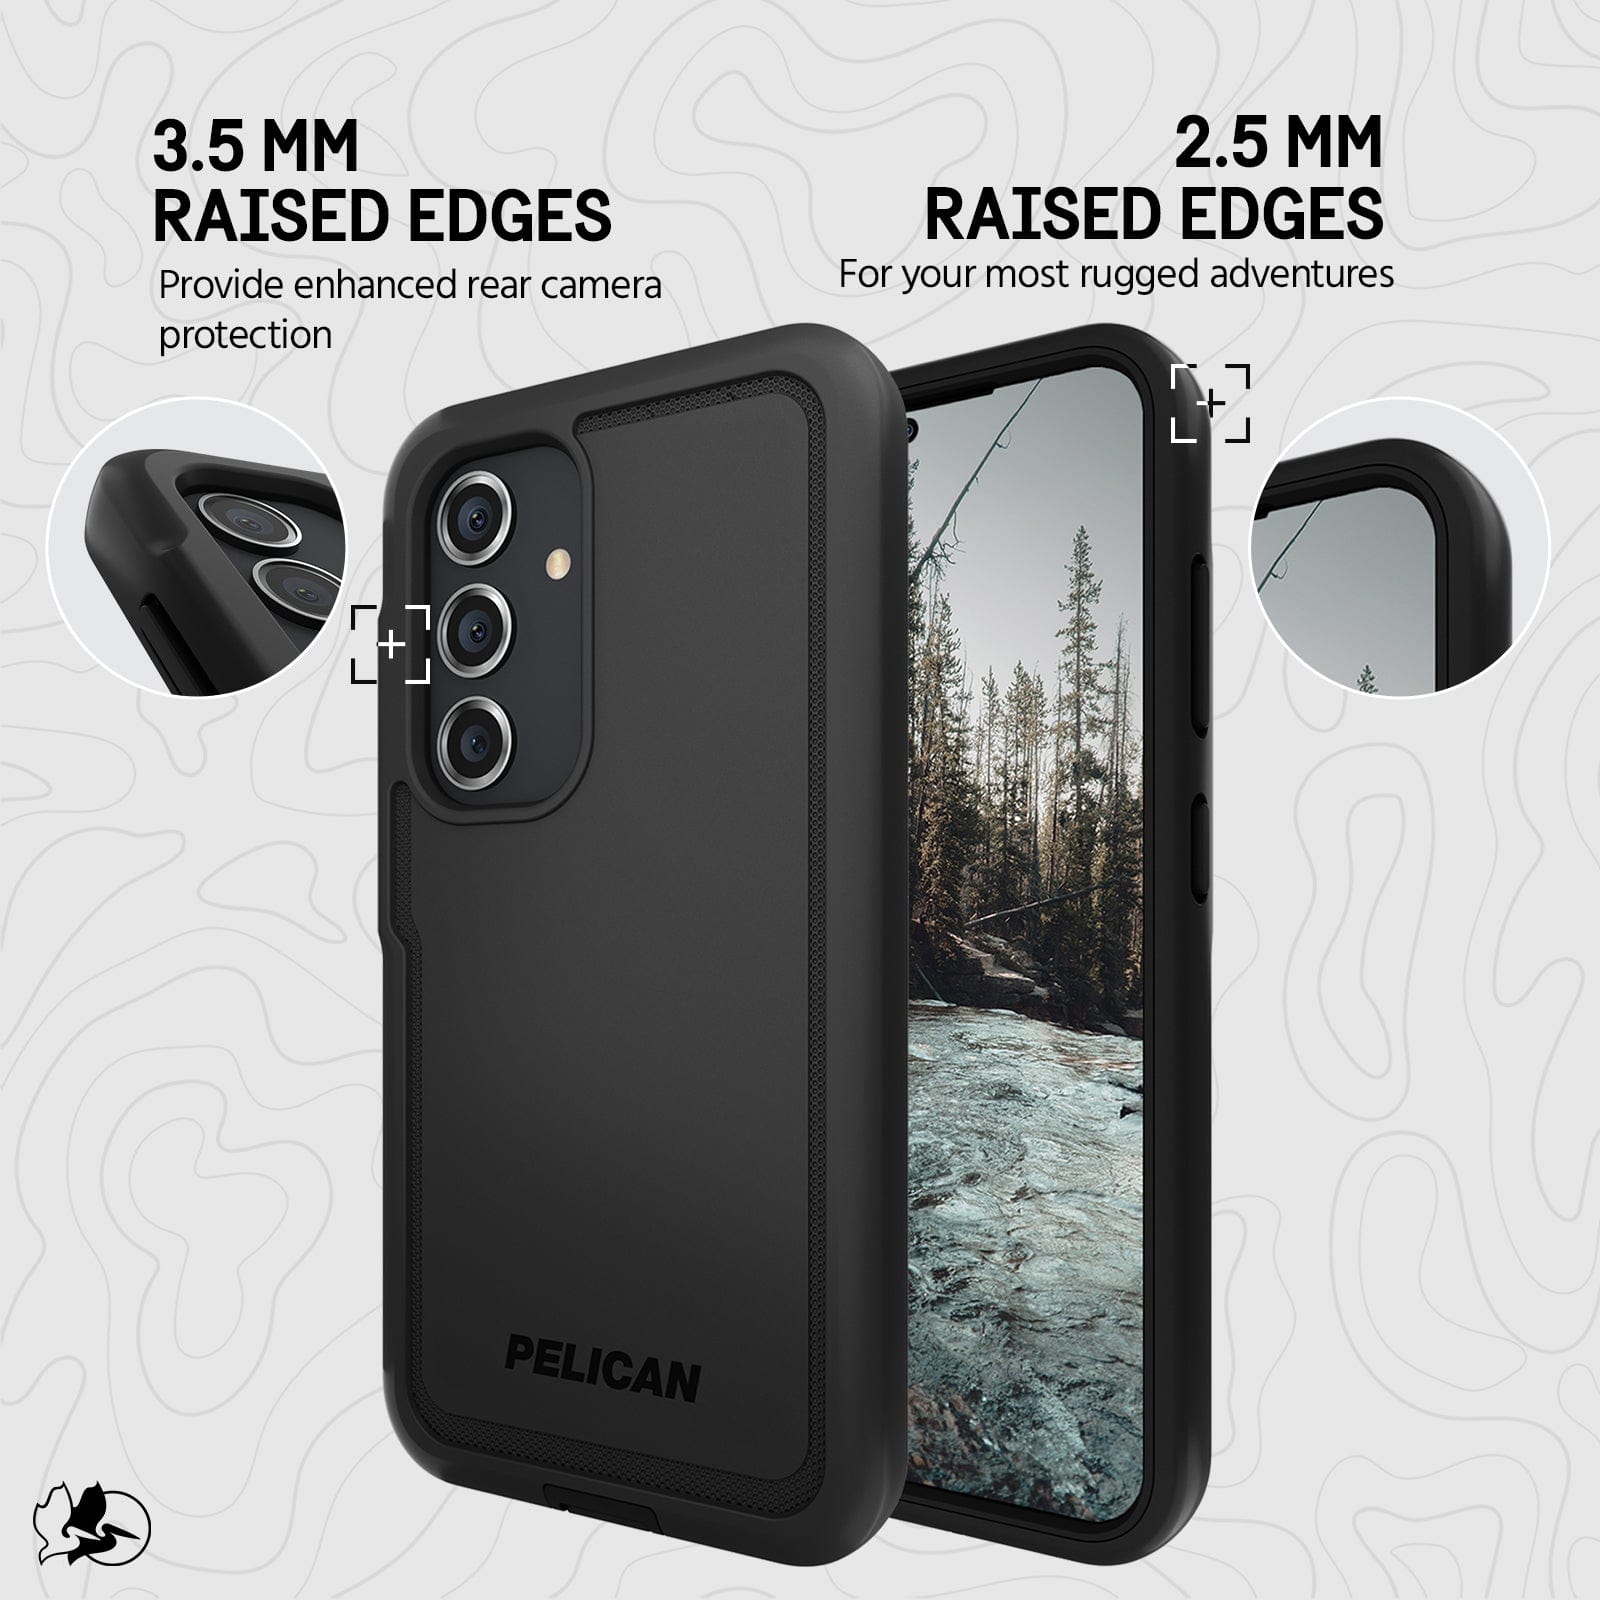 3.5MM RAISED EDGES PROVIDE ENHANCED REAR CAMERA PROTECTION. 2.5MM RAISED EDGES FOR YOUR MOST RUGGED ADVENTURES